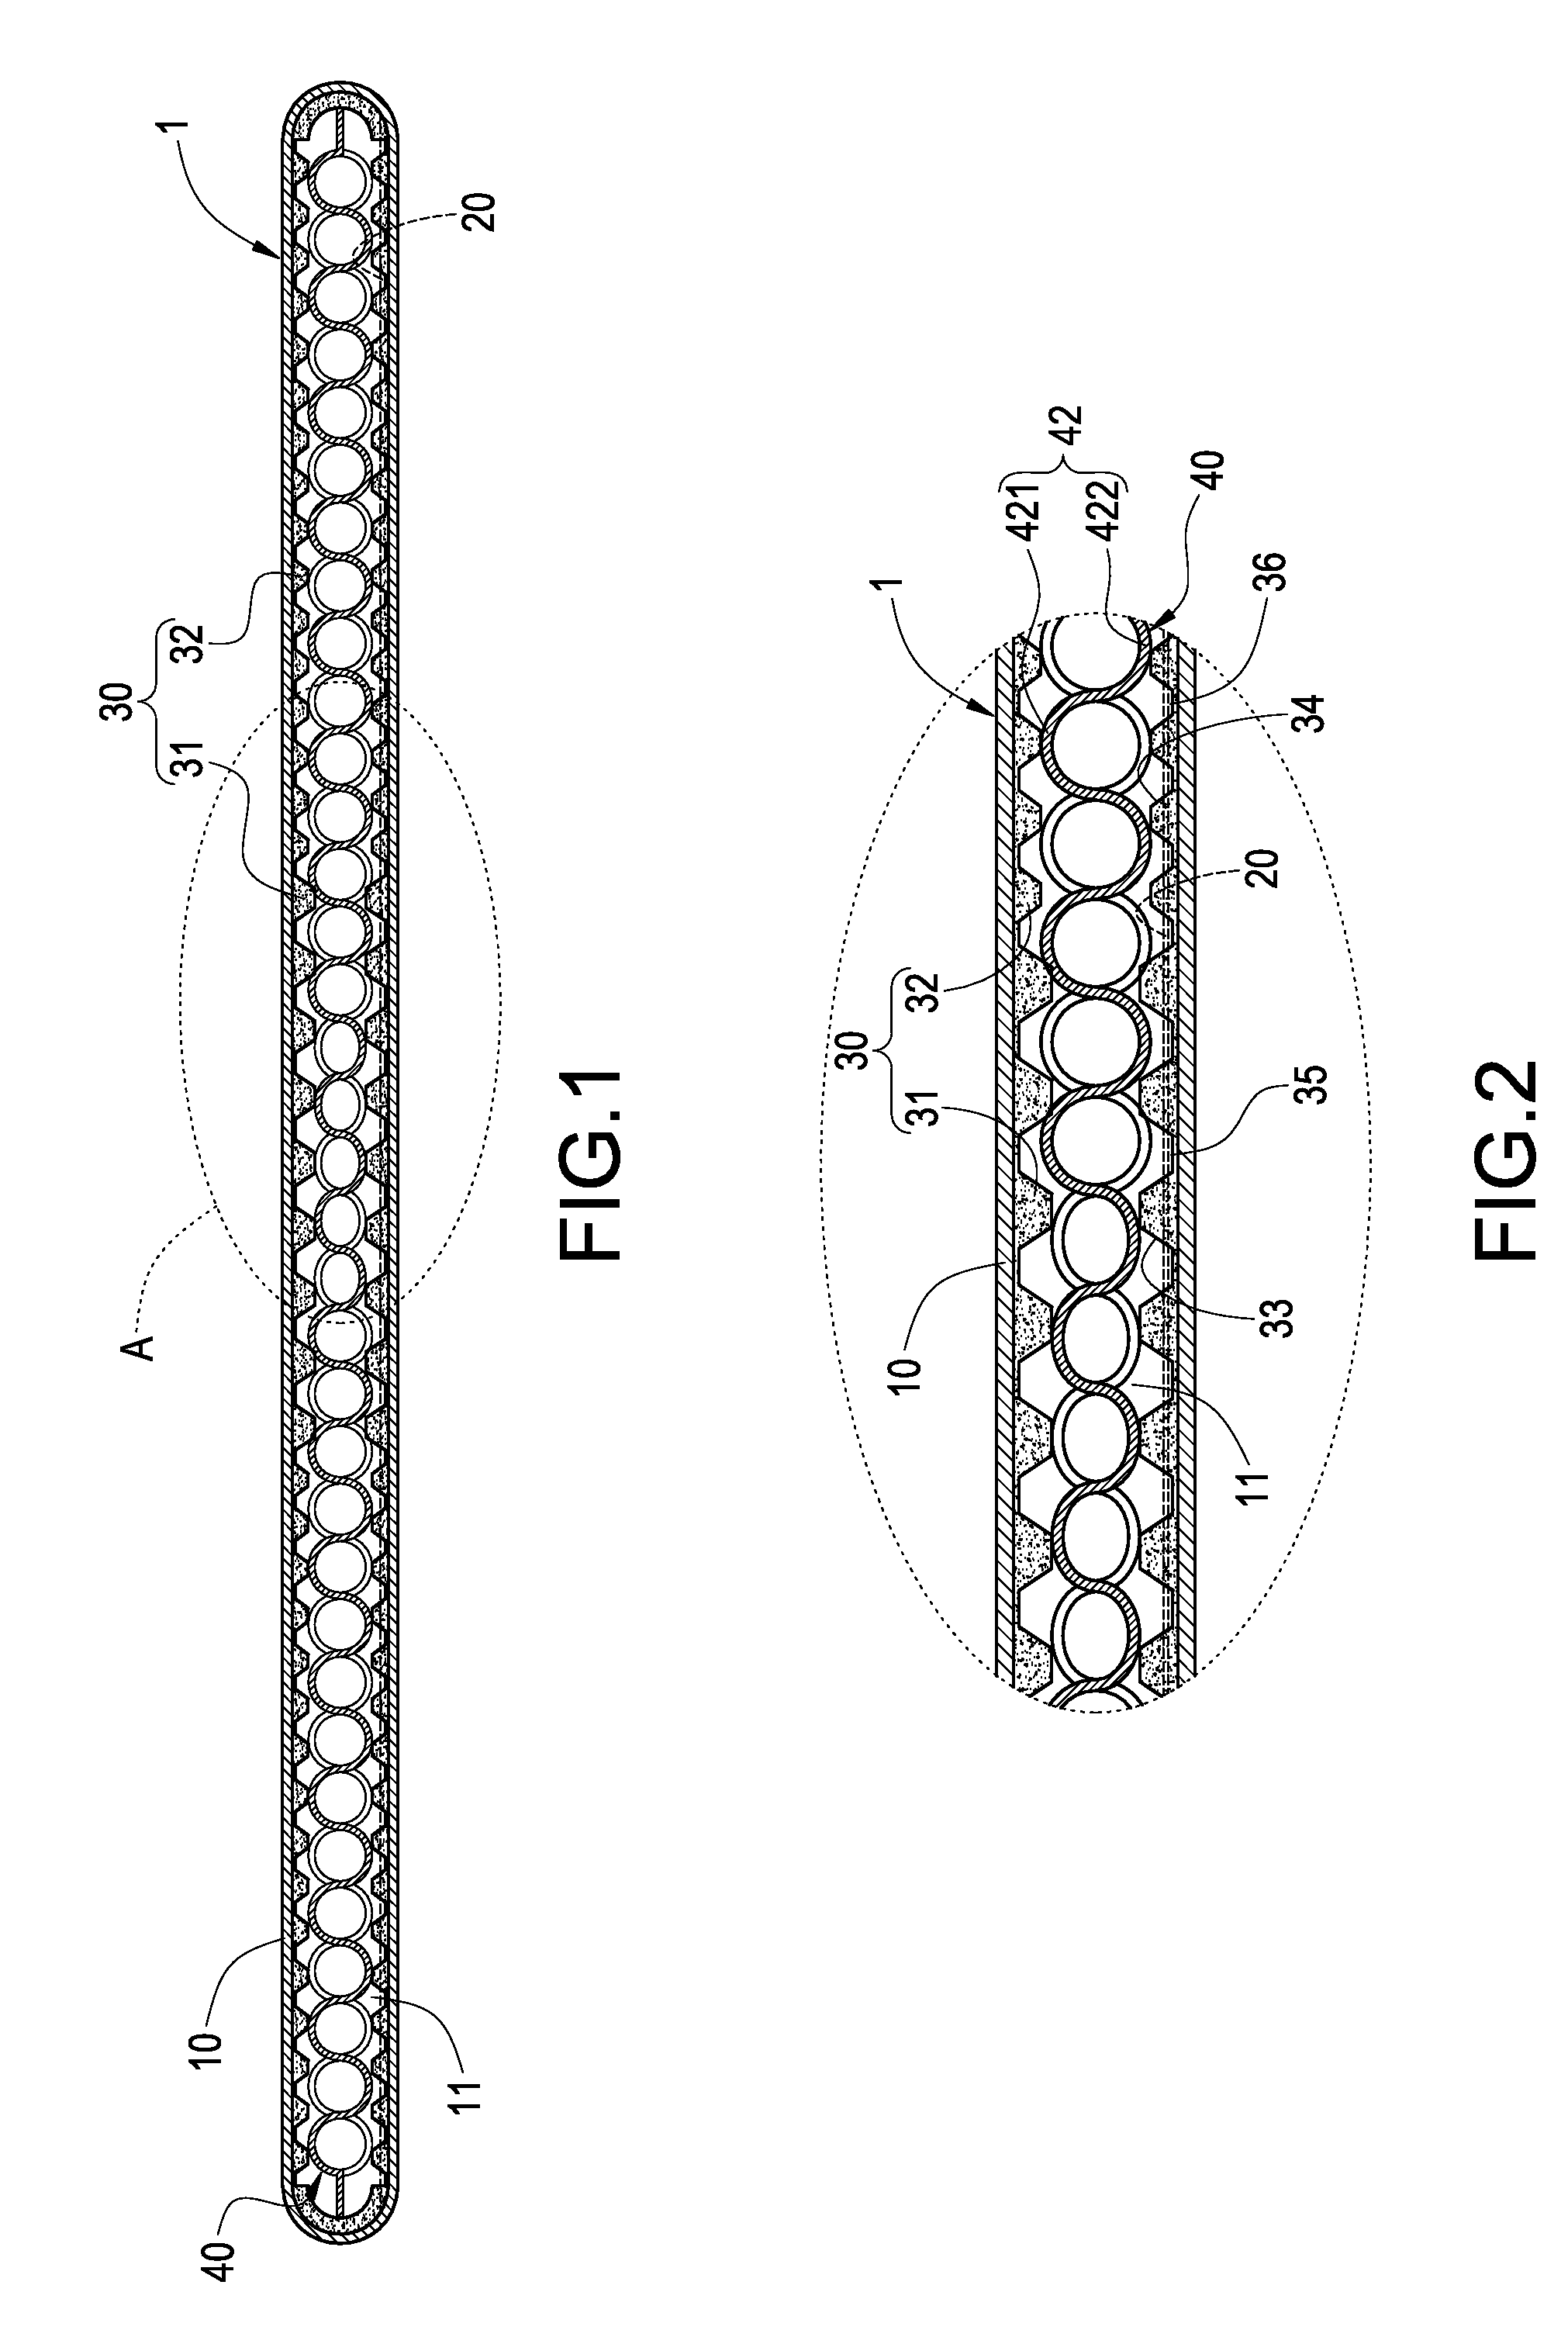 Vapor chamber with wick structure of different thickness and die for forming the same